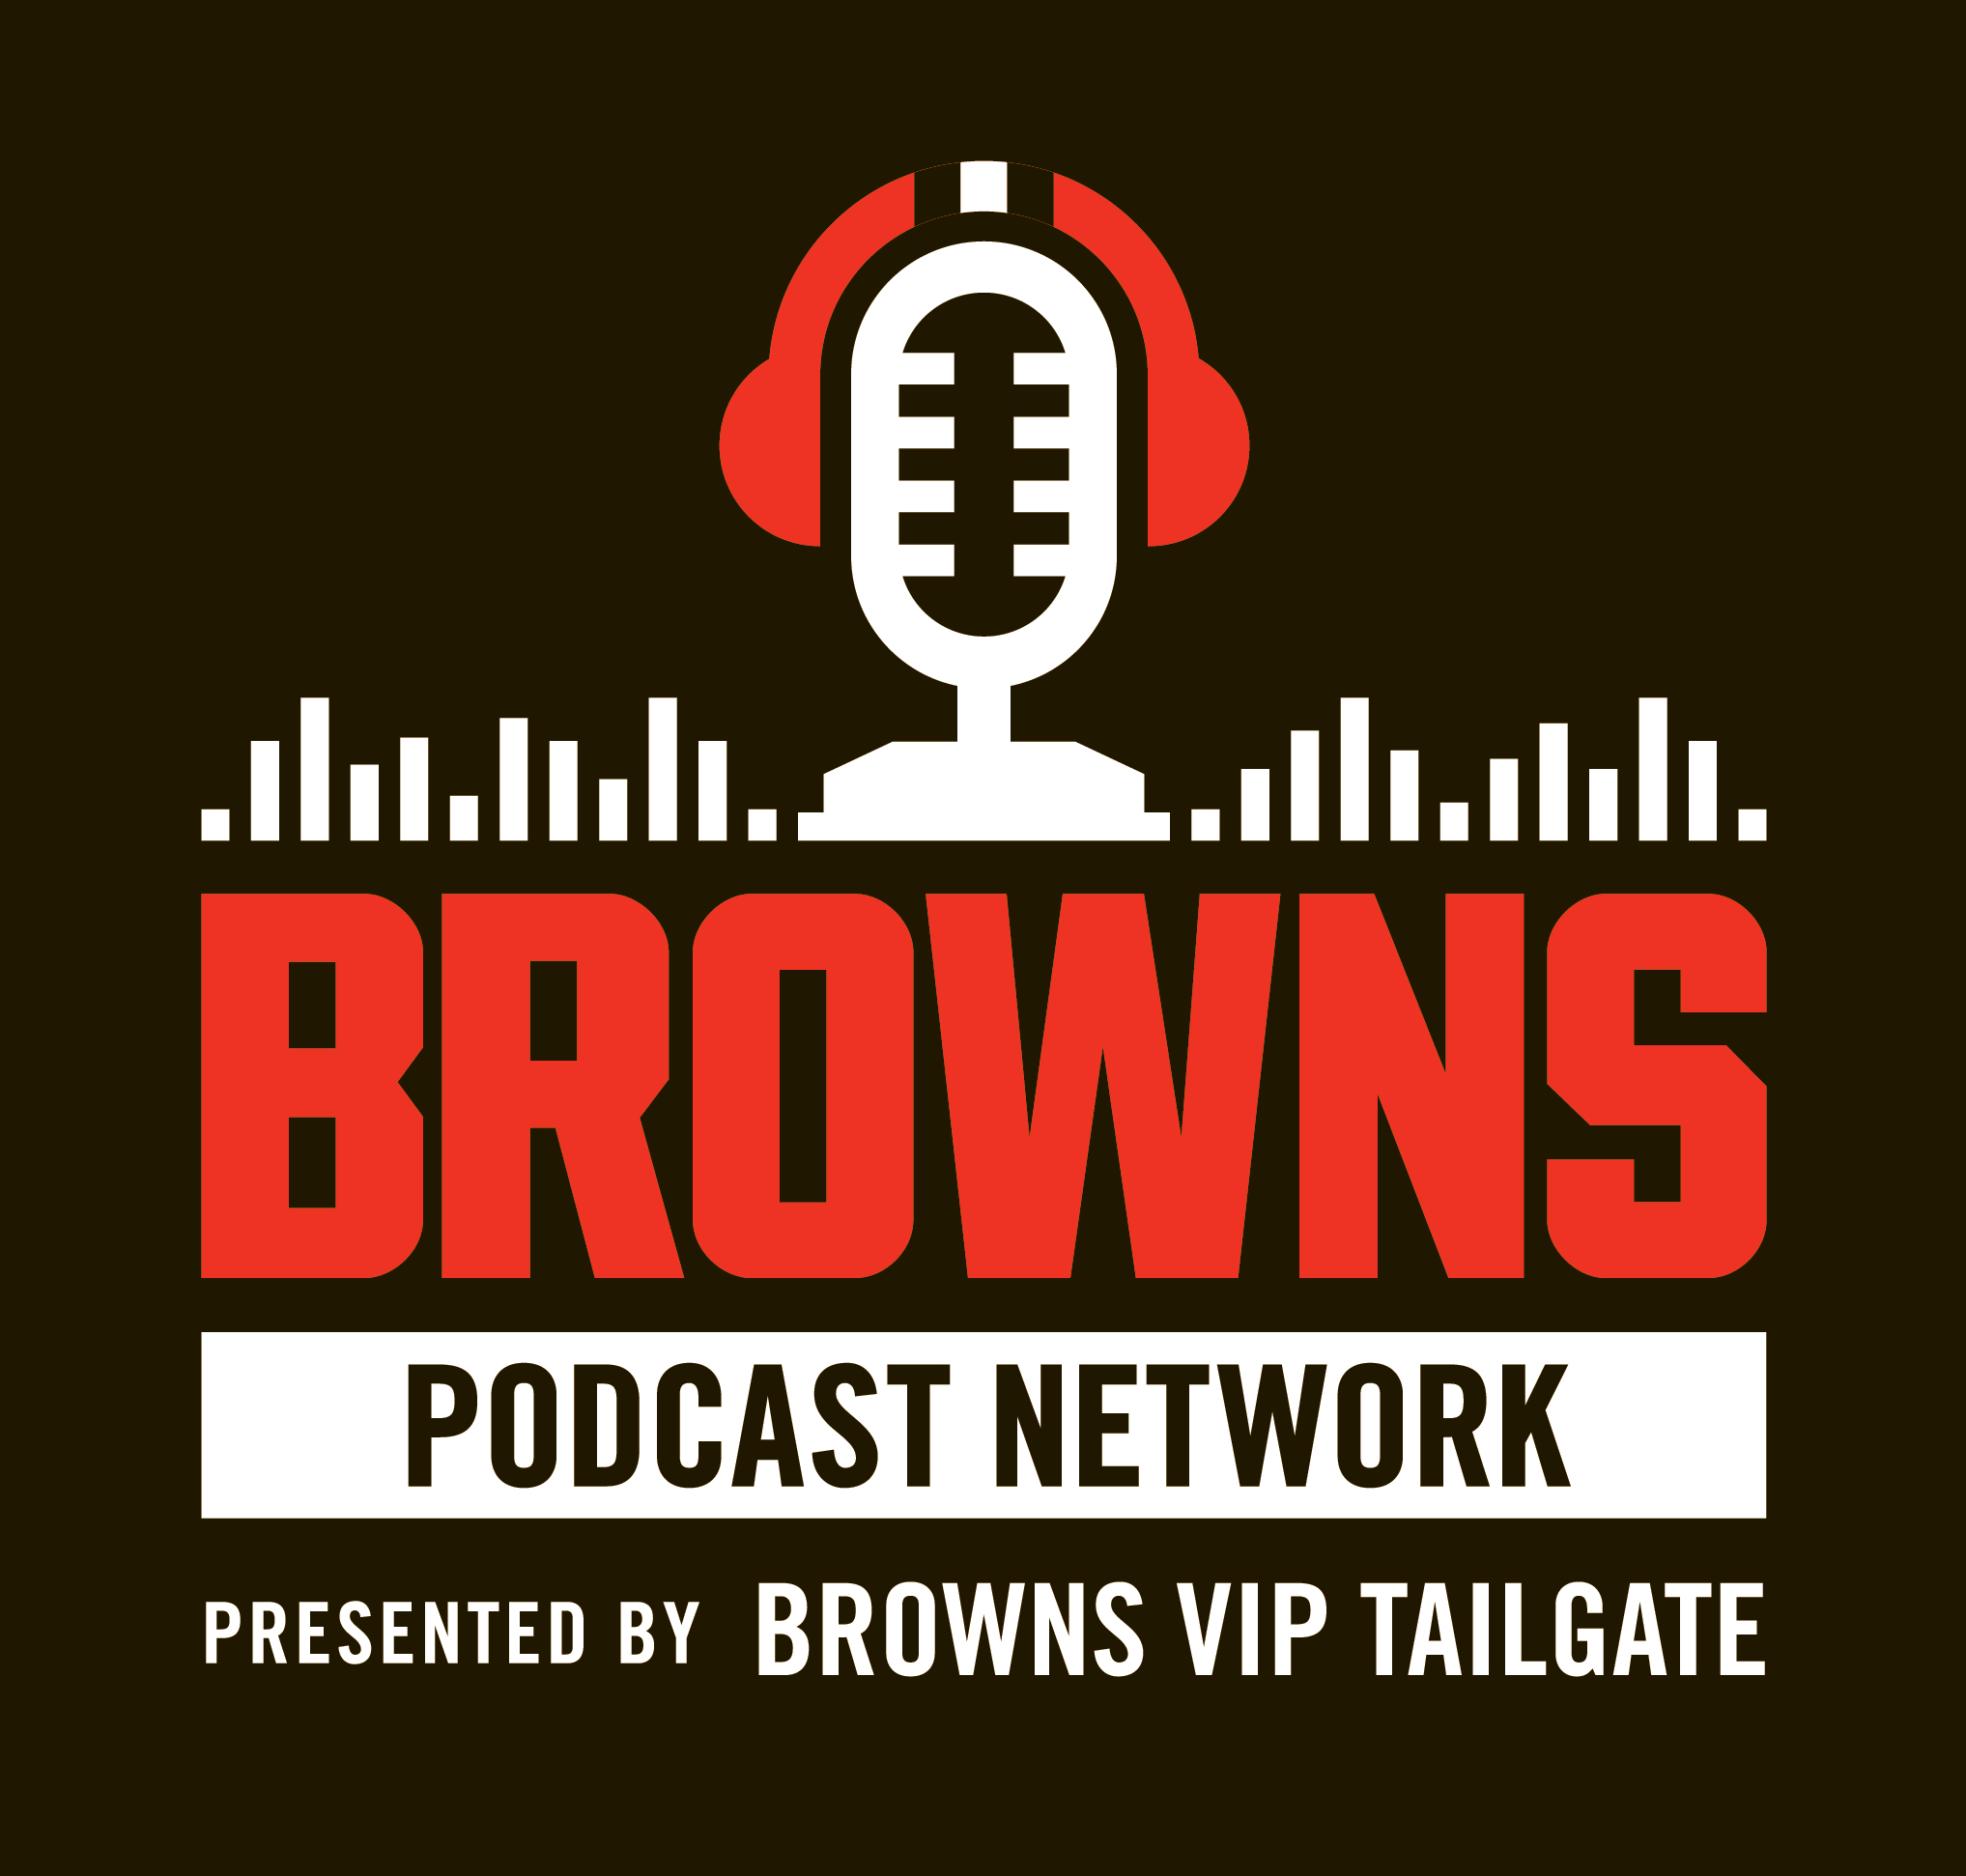 Cleveland Browns Daily – Browns Legend Hanford Dixon joins the show